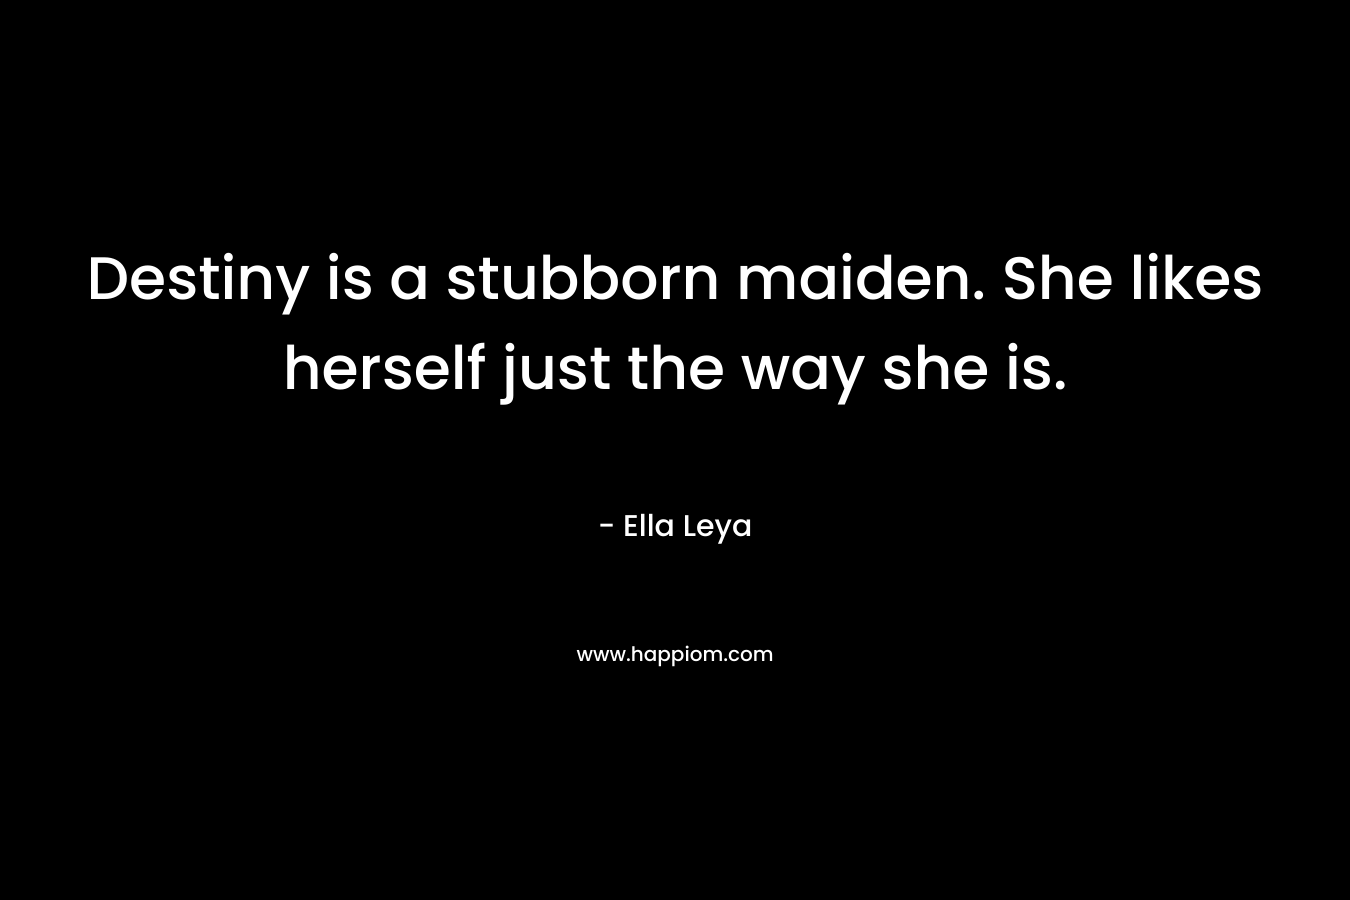 Destiny is a stubborn maiden. She likes herself just the way she is. – Ella Leya